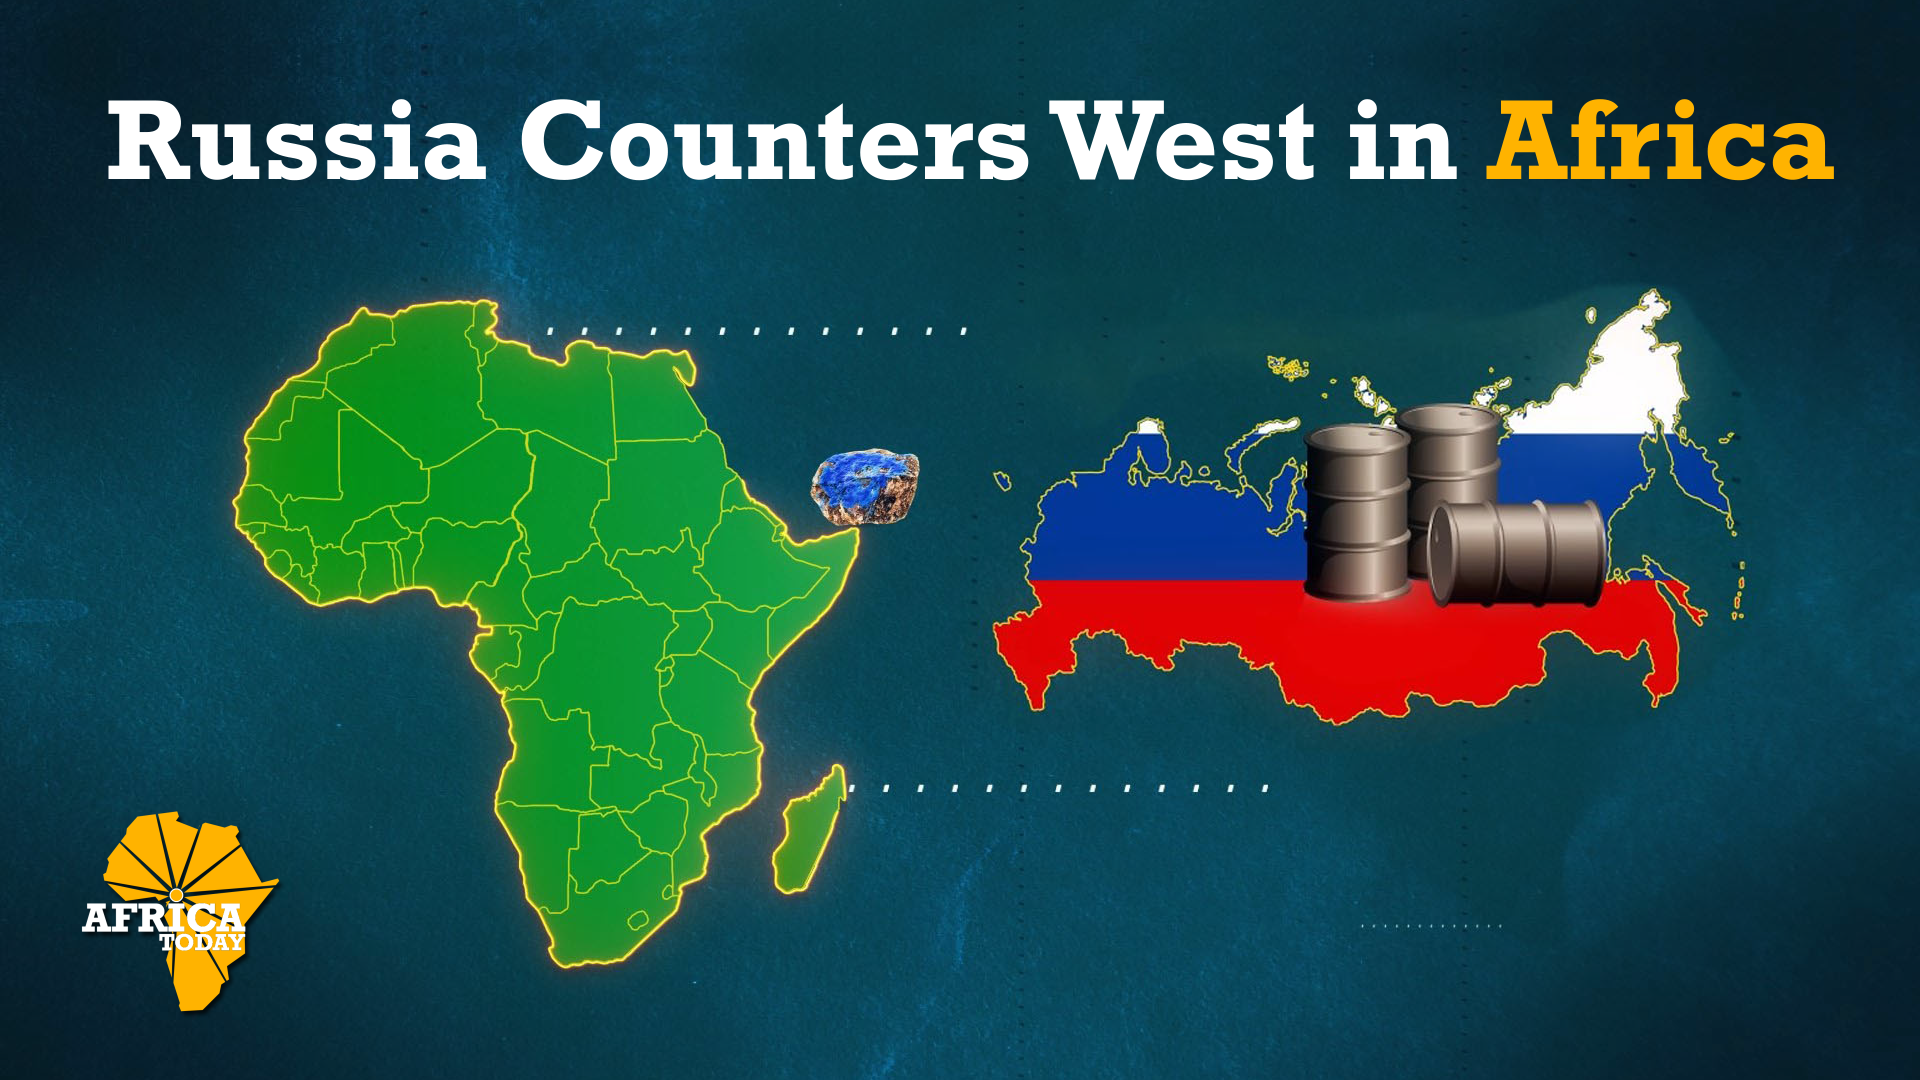 Russia Counters West in Africa